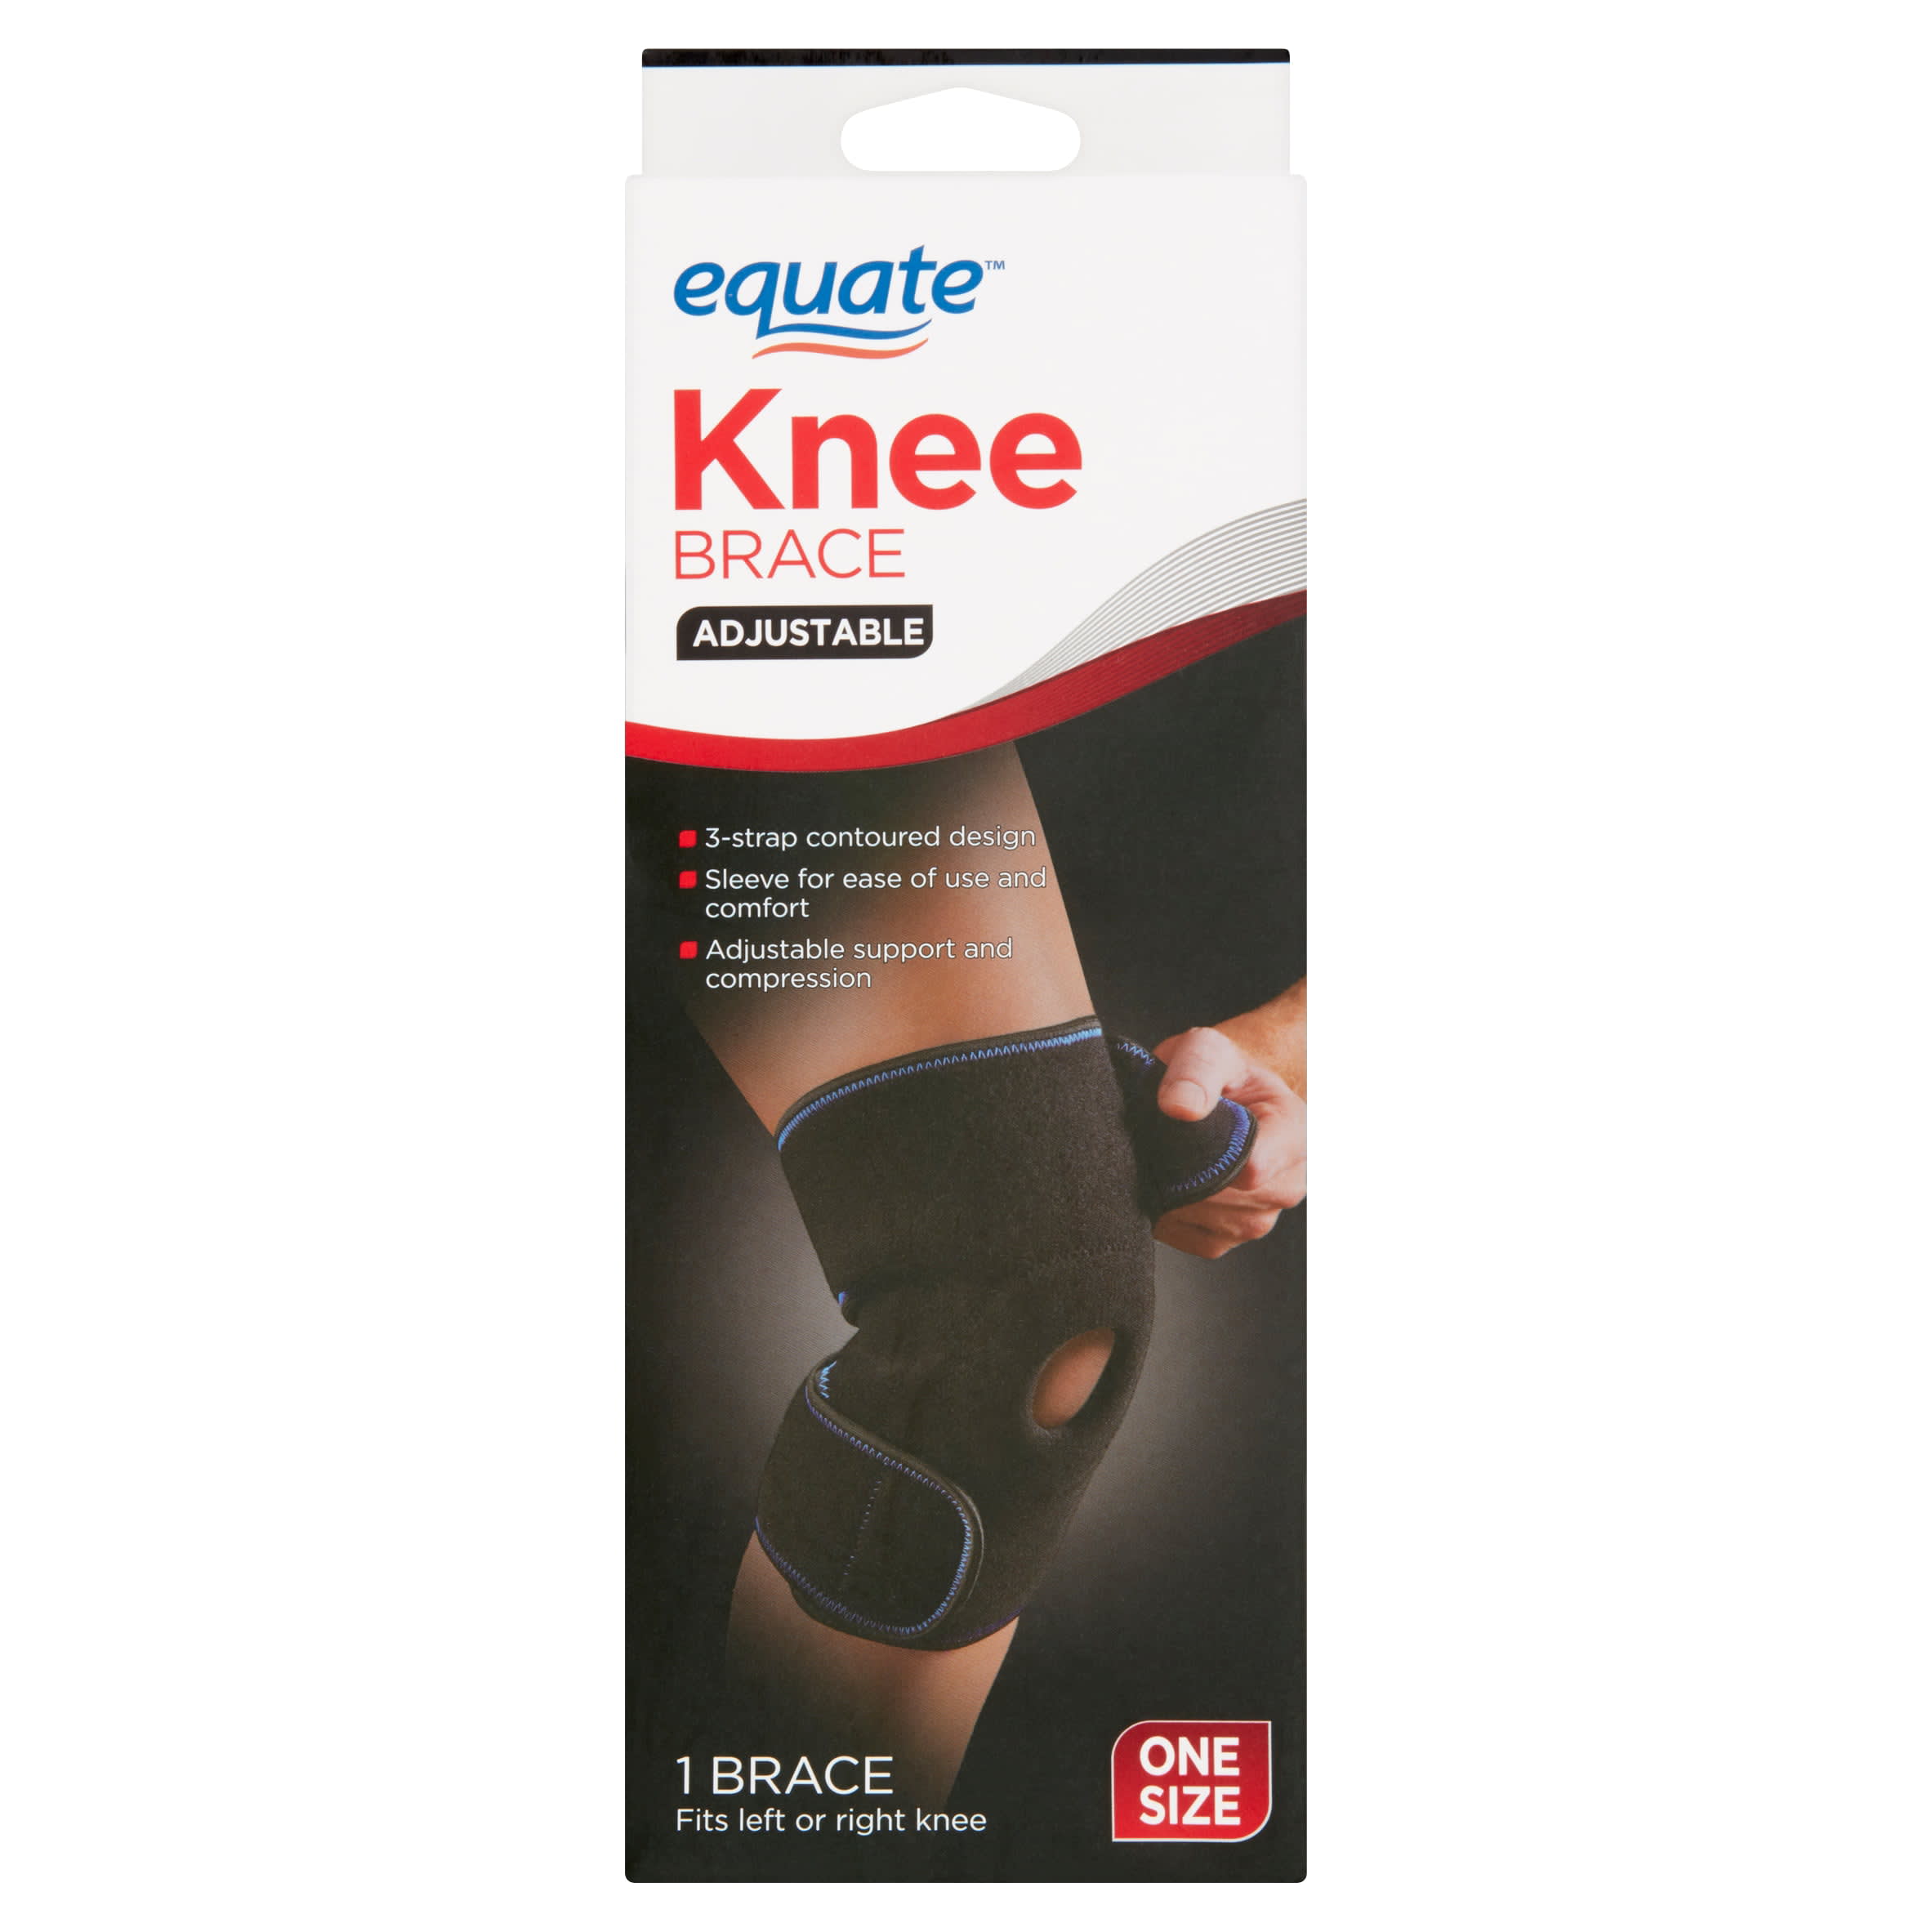 Copper Fit ICE Knee Compression Sleeve Infused with Menthol, Large/X-Large  - DroneUp Delivery